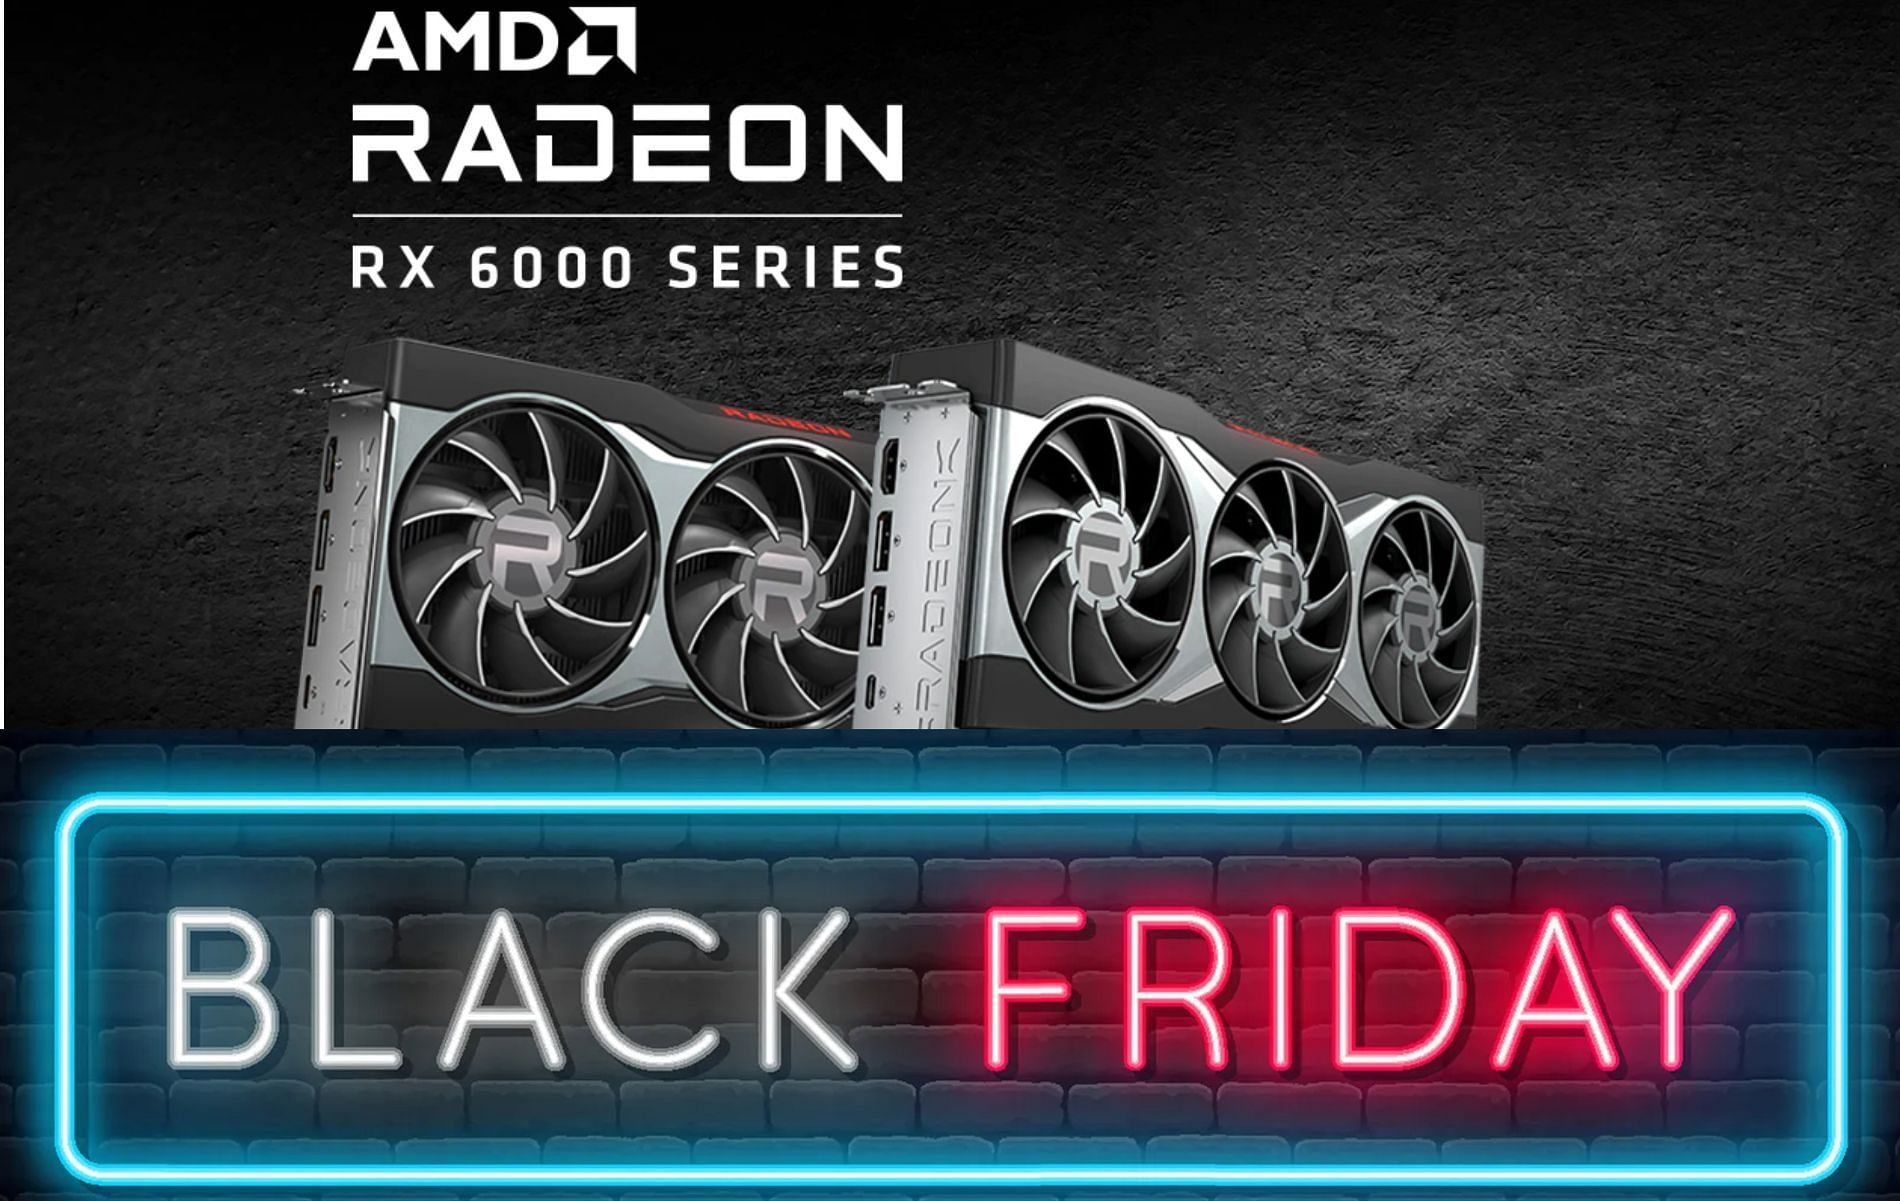 Black Friday graphics cards sale (Image by AMD)